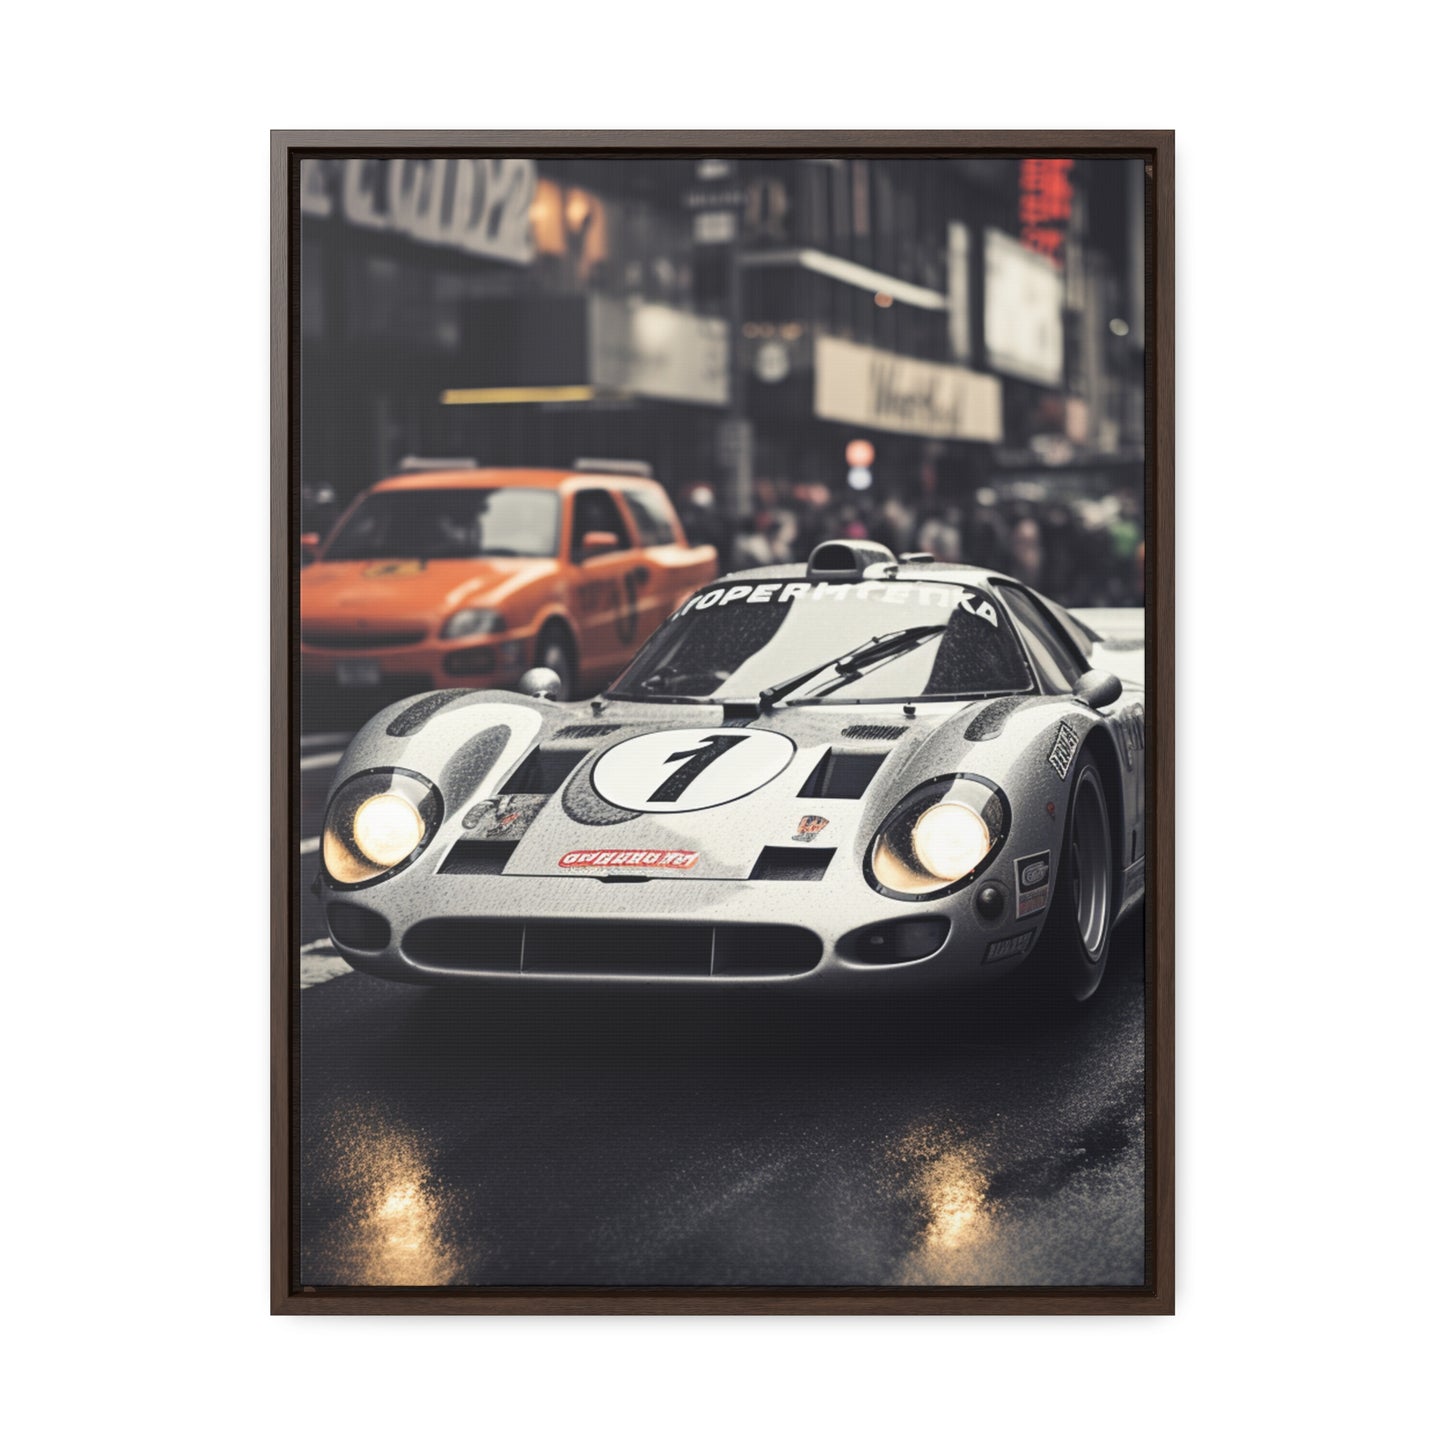 Porsche 917 in the streets of NY